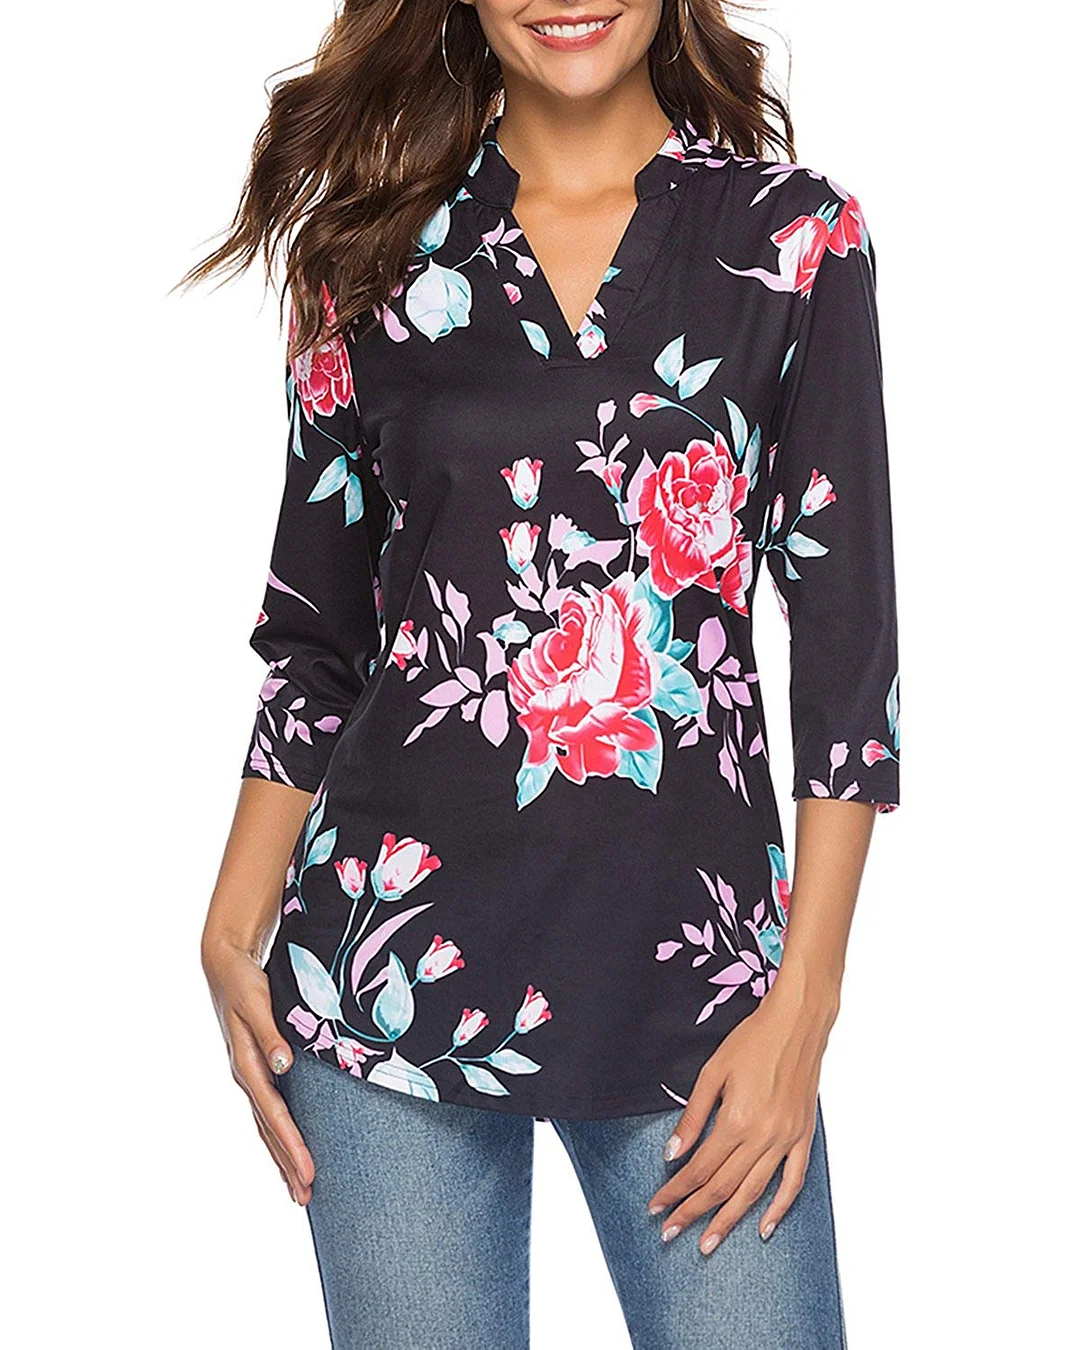 Women's 3/4 Sleeve Floral V Neck Tops Casual Tunic Blouse Loose Shirt